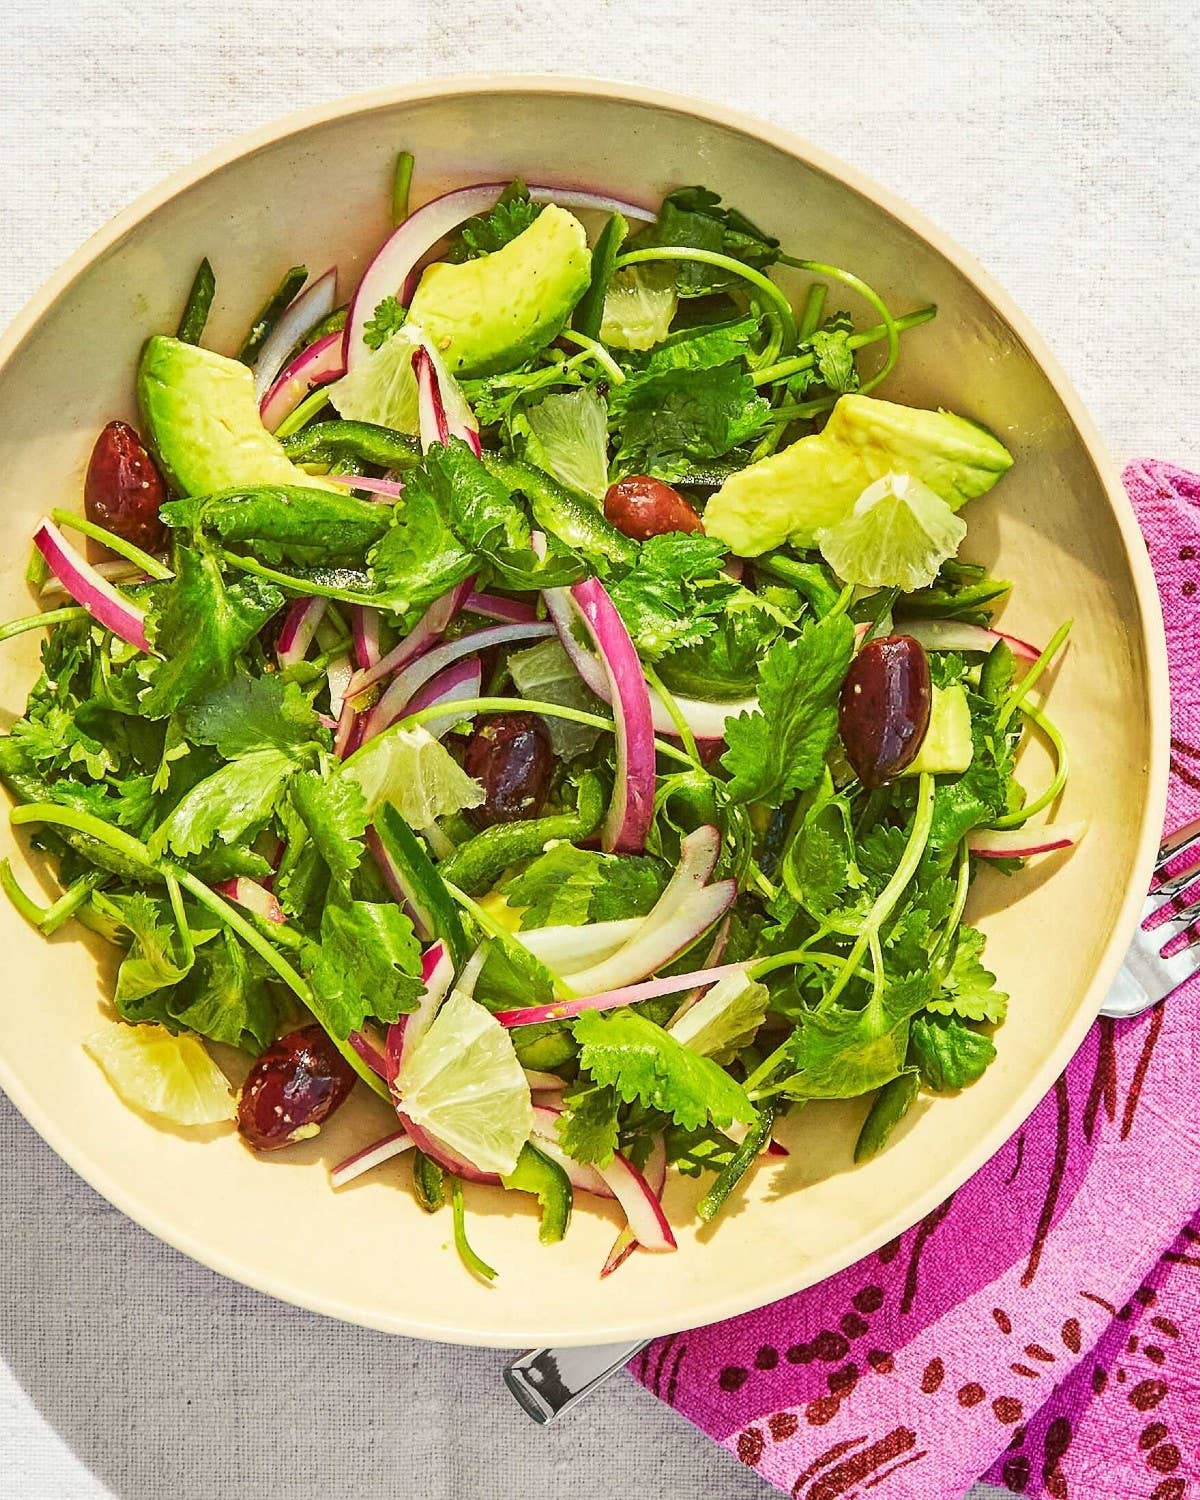 12 Green Salads That Are Anything But Boring